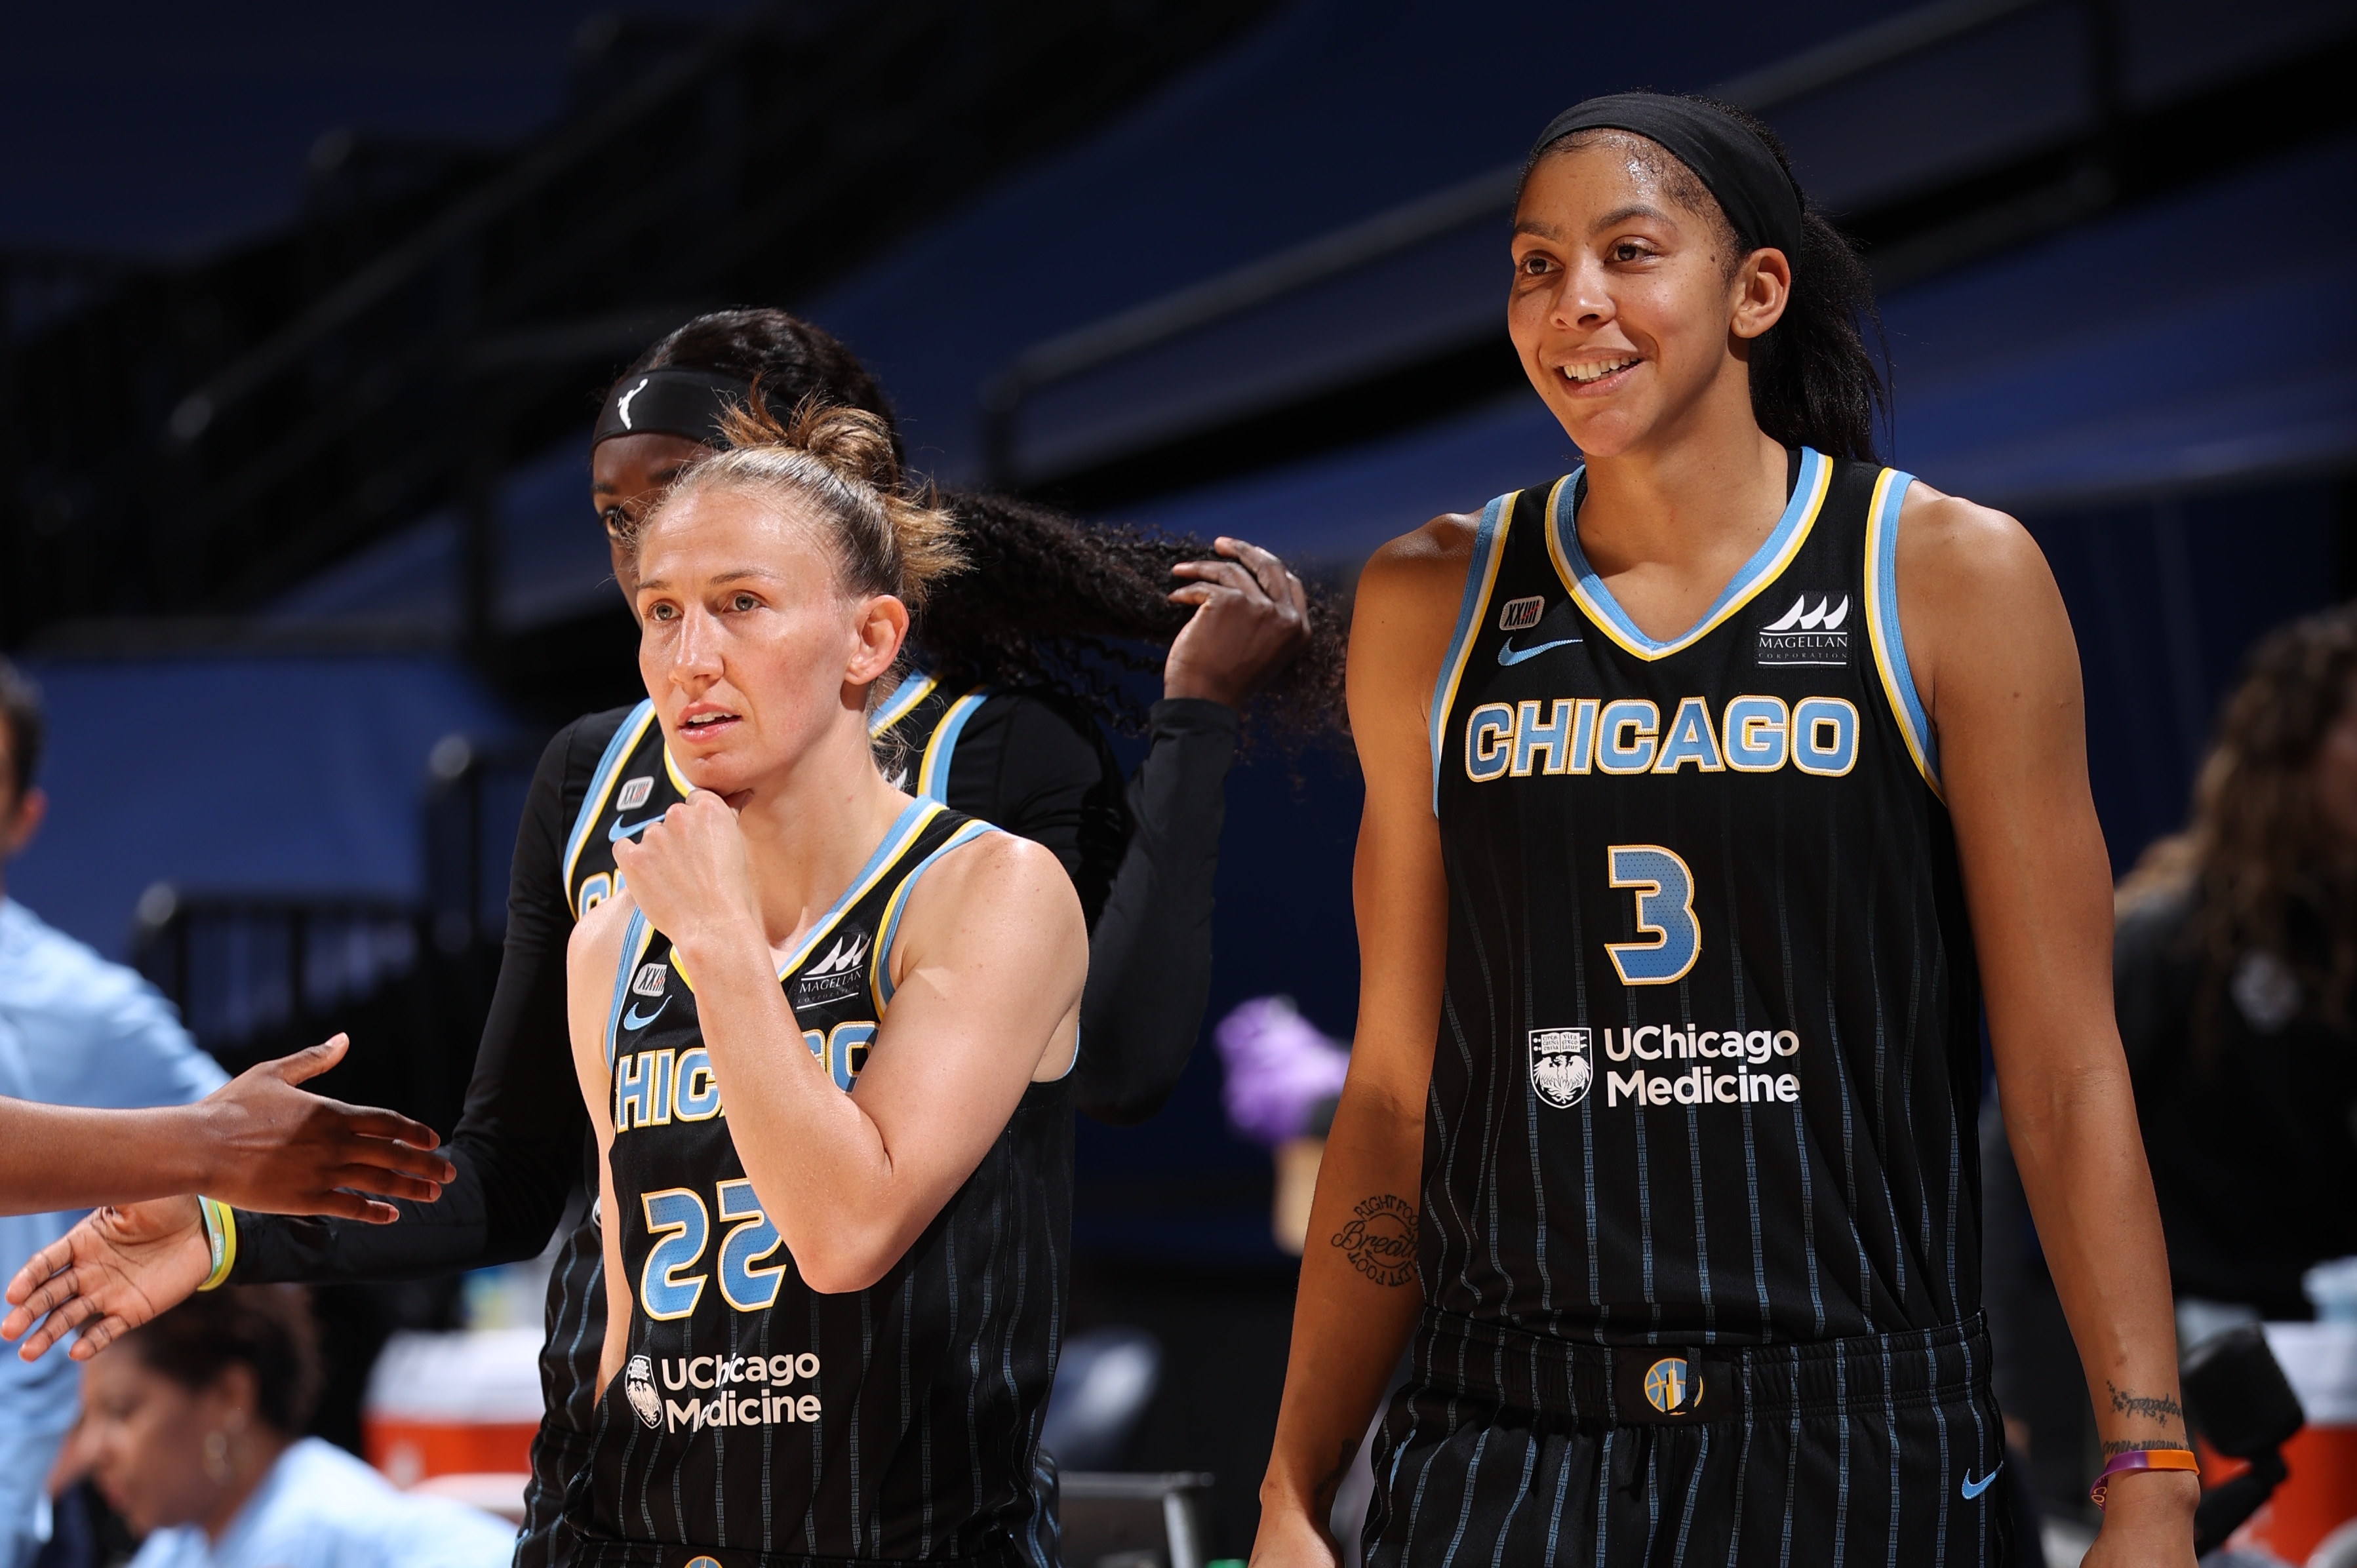 Wnba All Star Game 21 Rosters Full Lineups For Team Wnba Vs Team Usa News Scores Highlights Stats And Rumors Bleacher Report